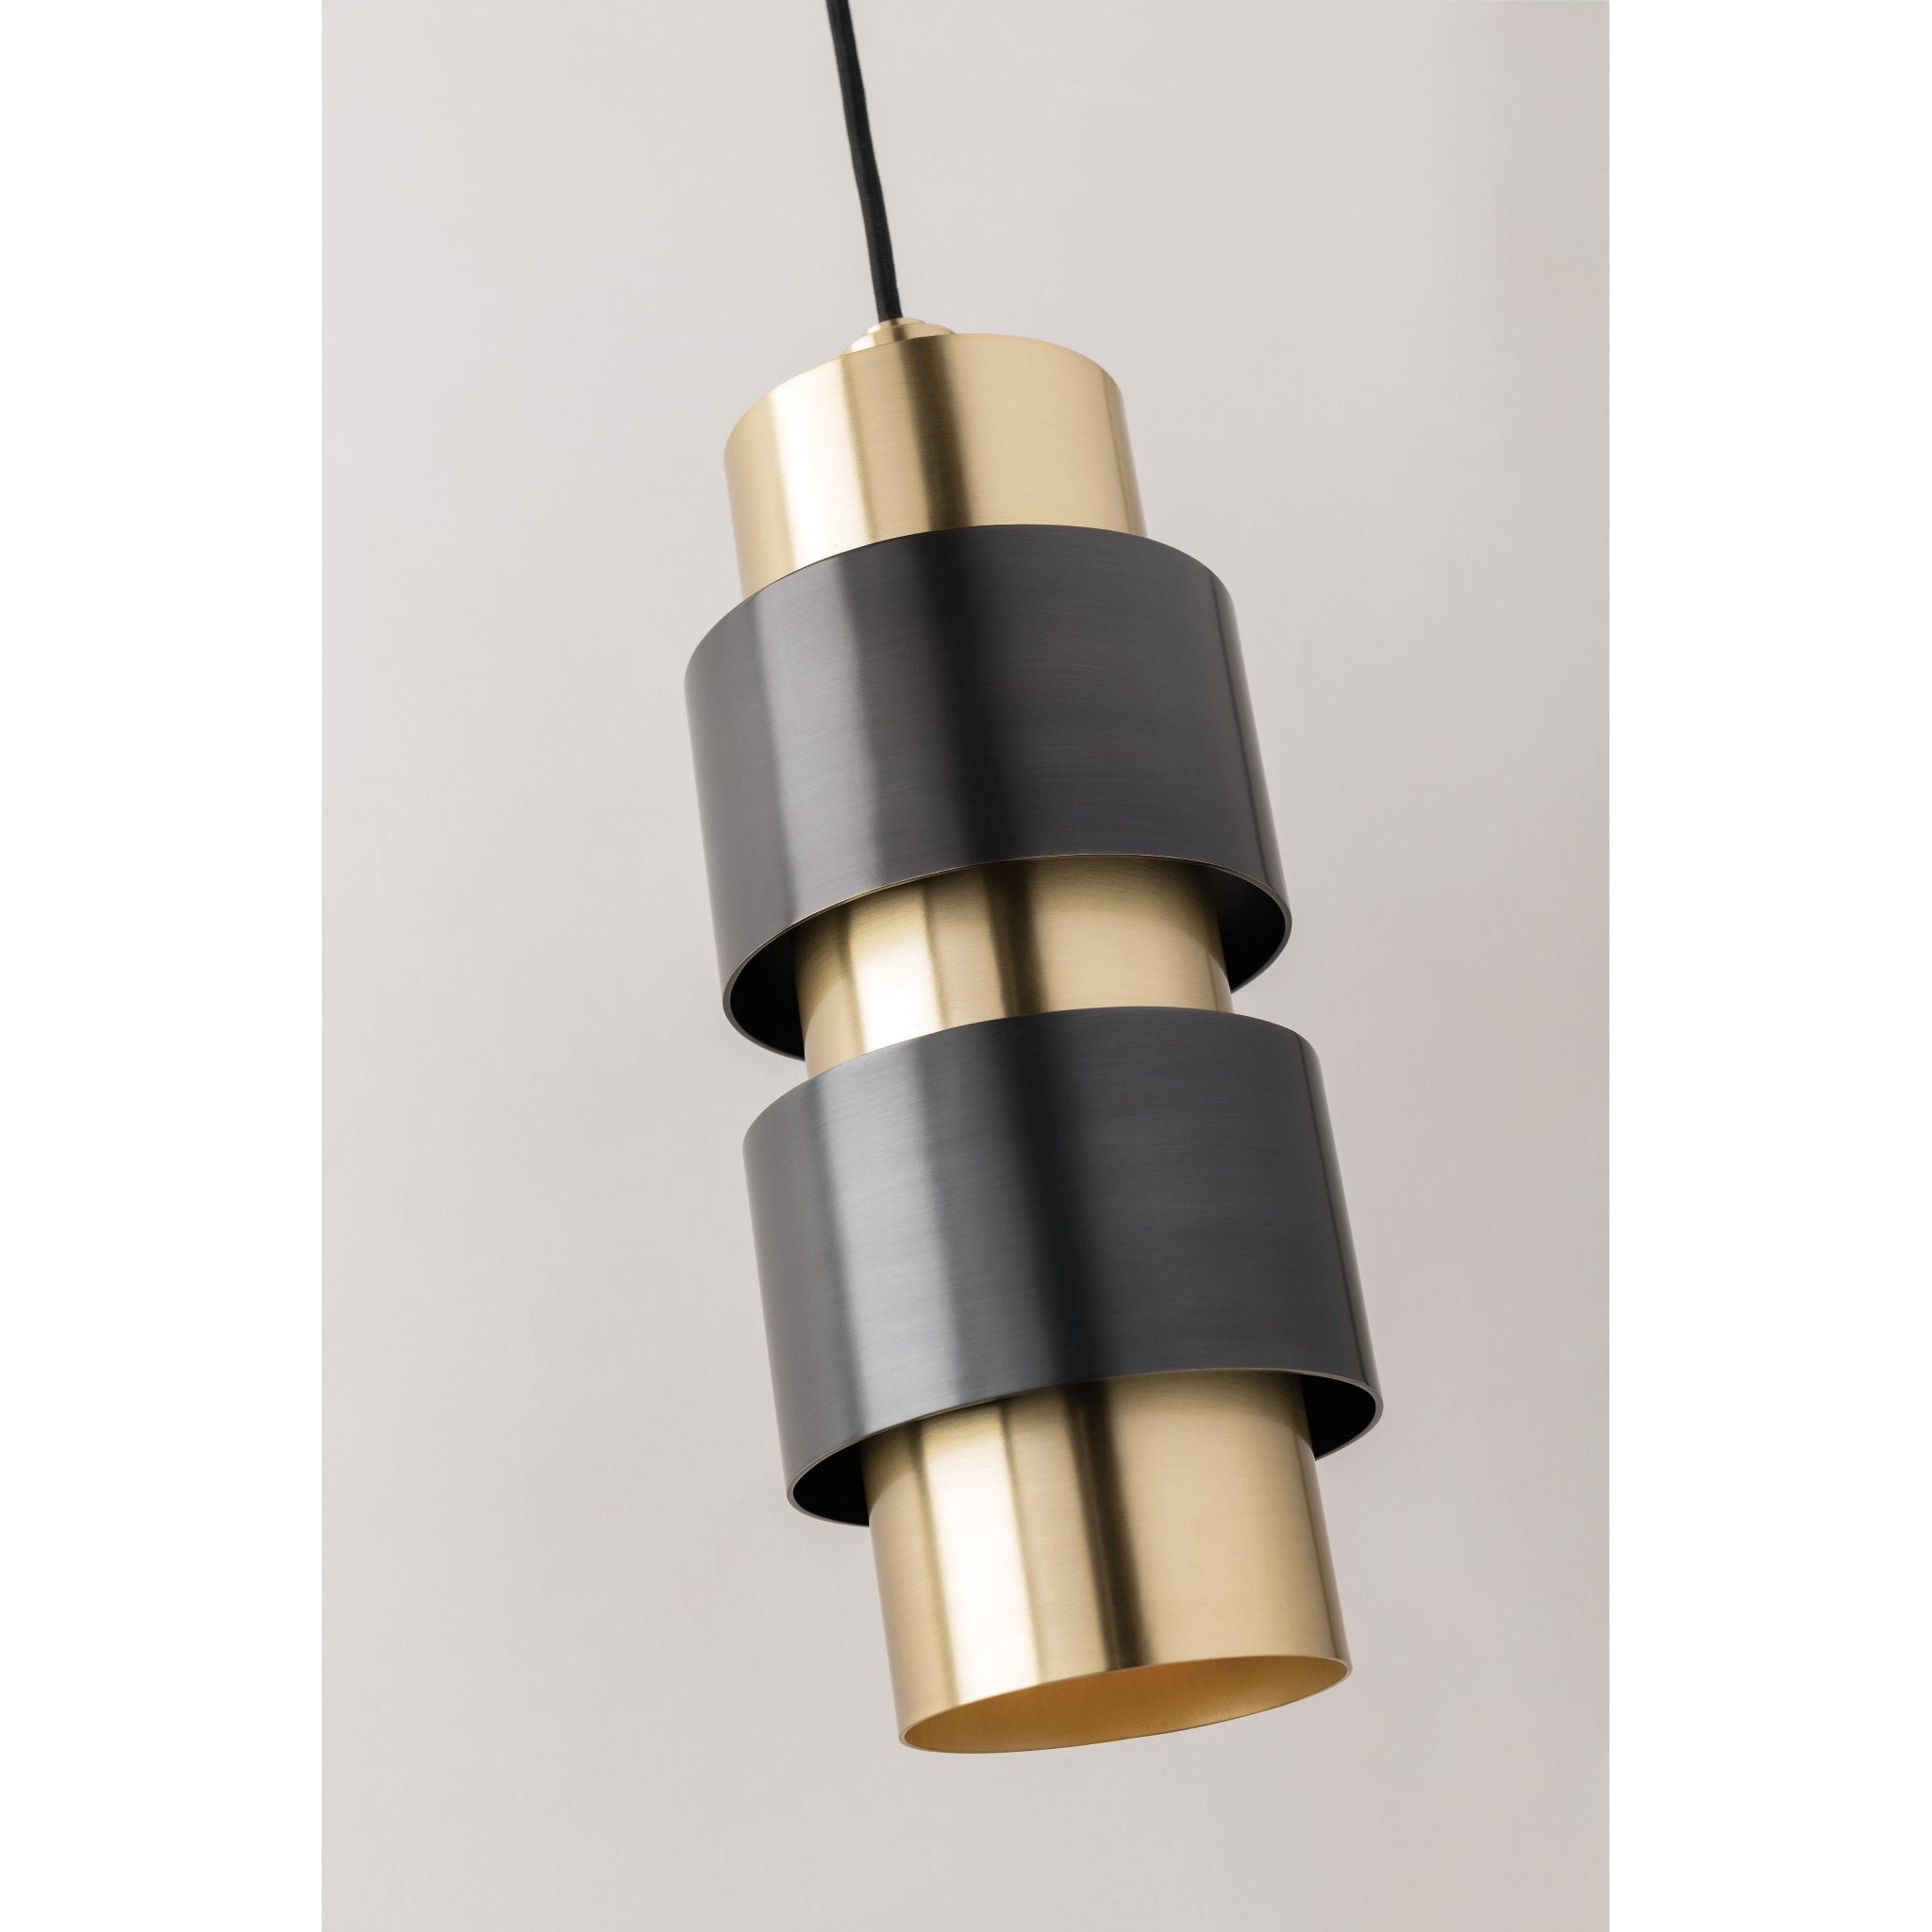 Cyrus 2 Light Pendant in Polished Nickel/old Bronze Combo